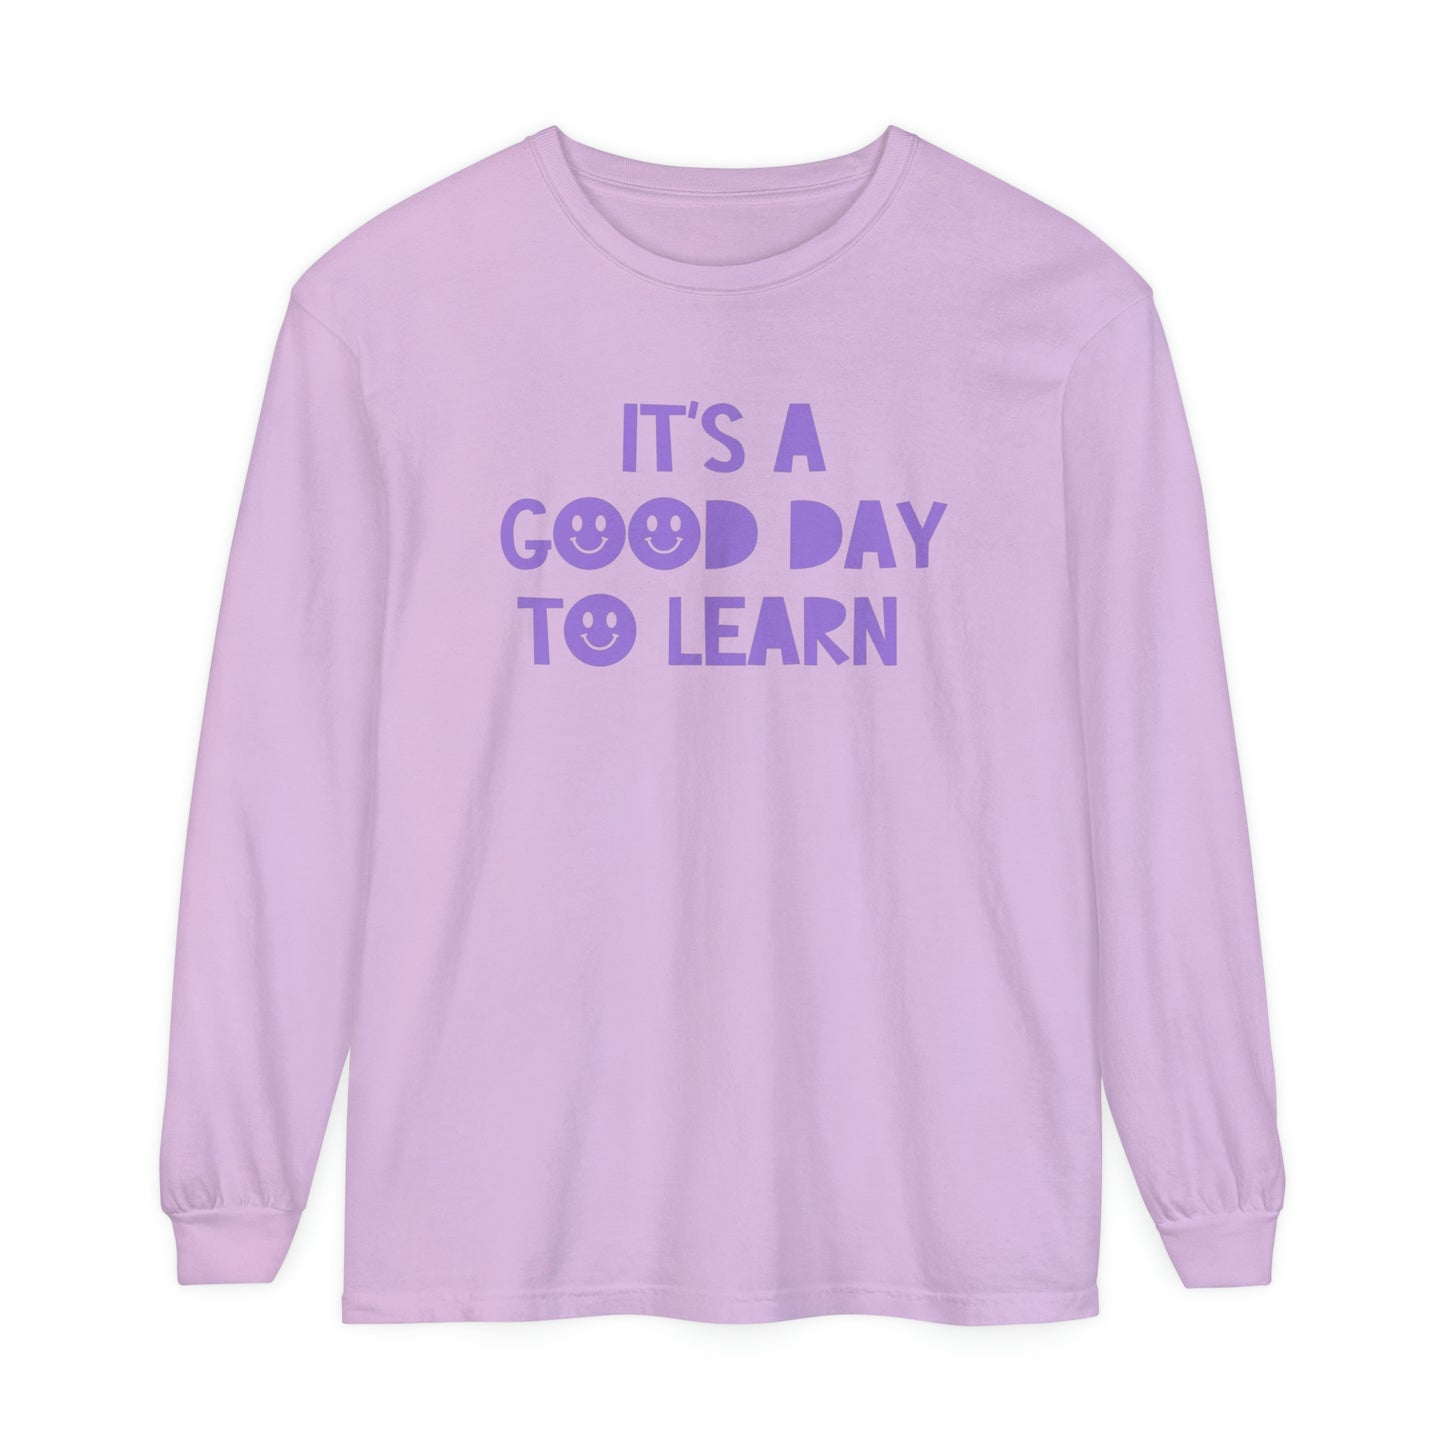 It's a Good Day to Learn Long Sleeve Comfort Colors T-Shirt